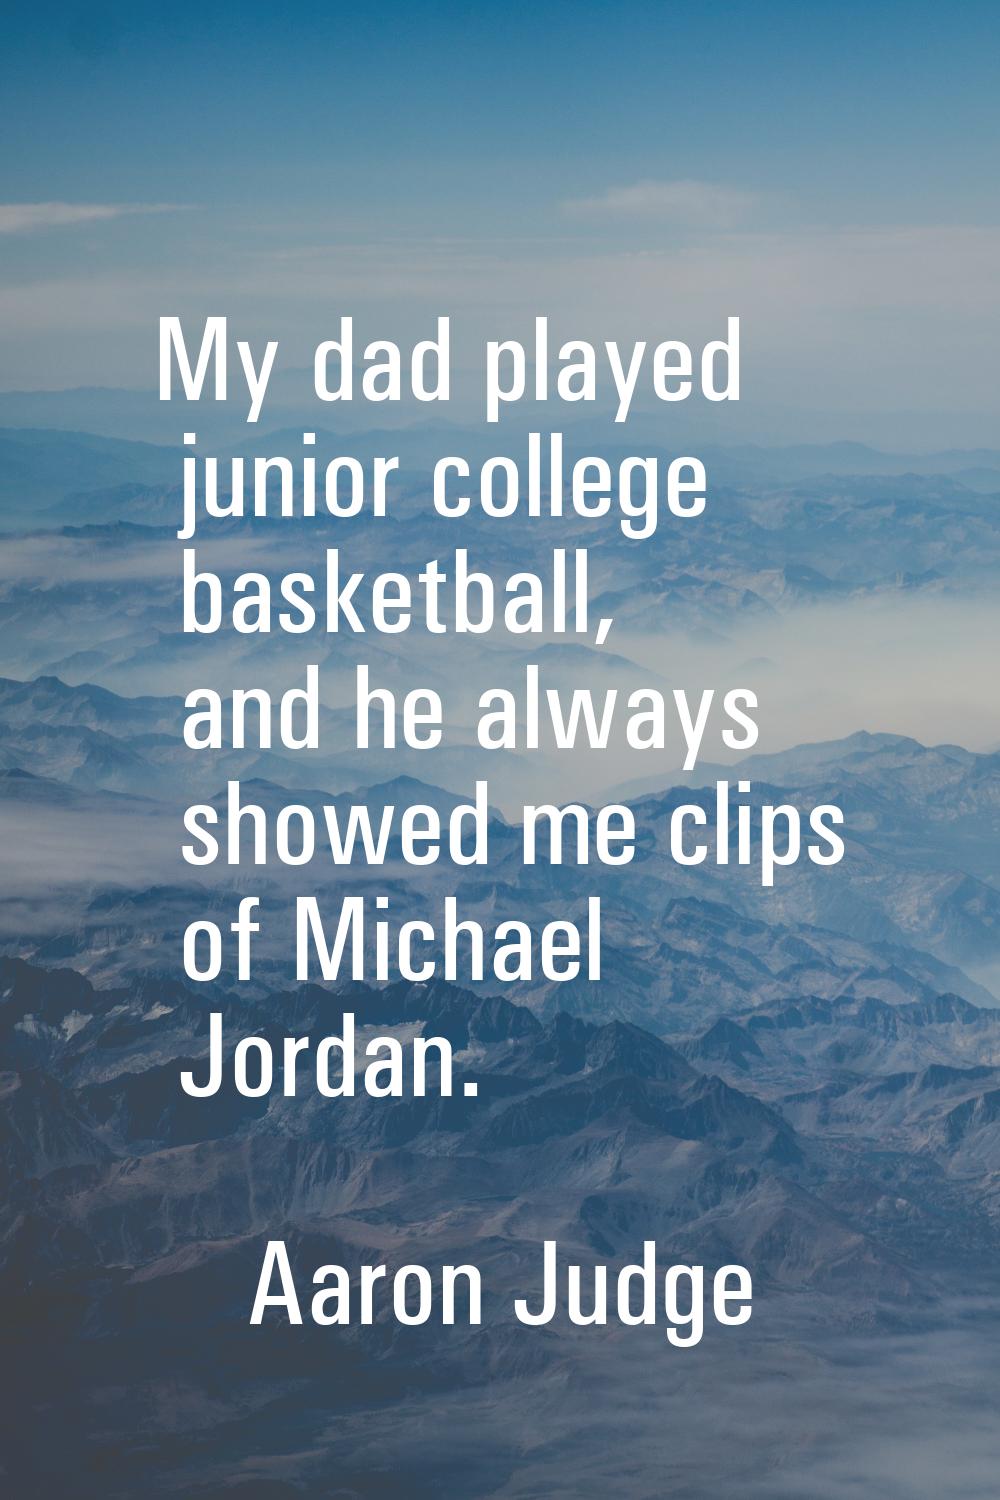 My dad played junior college basketball, and he always showed me clips of Michael Jordan.